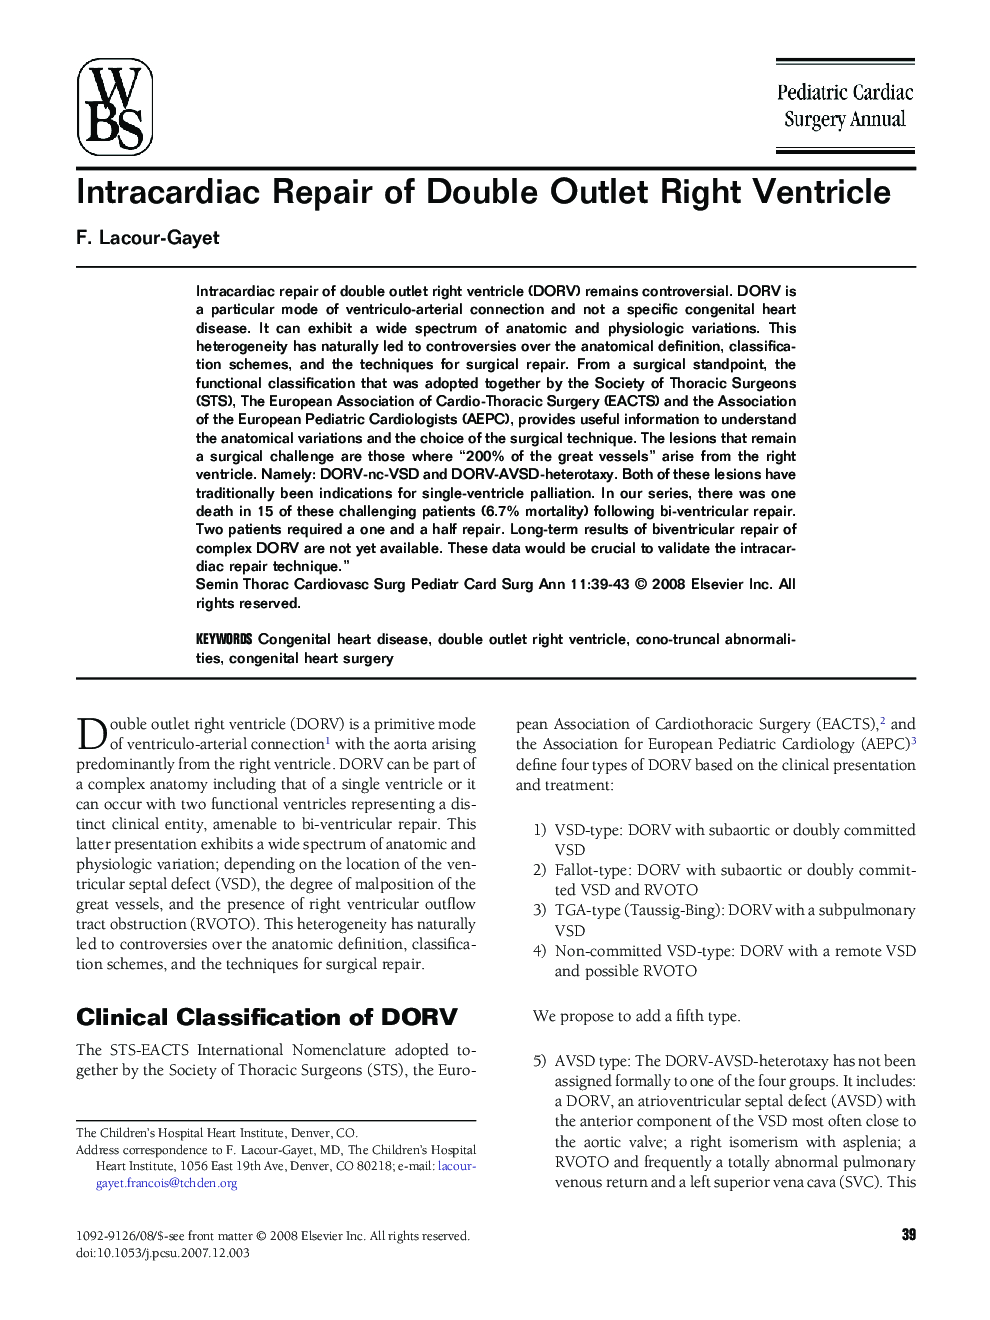 Intracardiac Repair of Double Outlet Right Ventricle